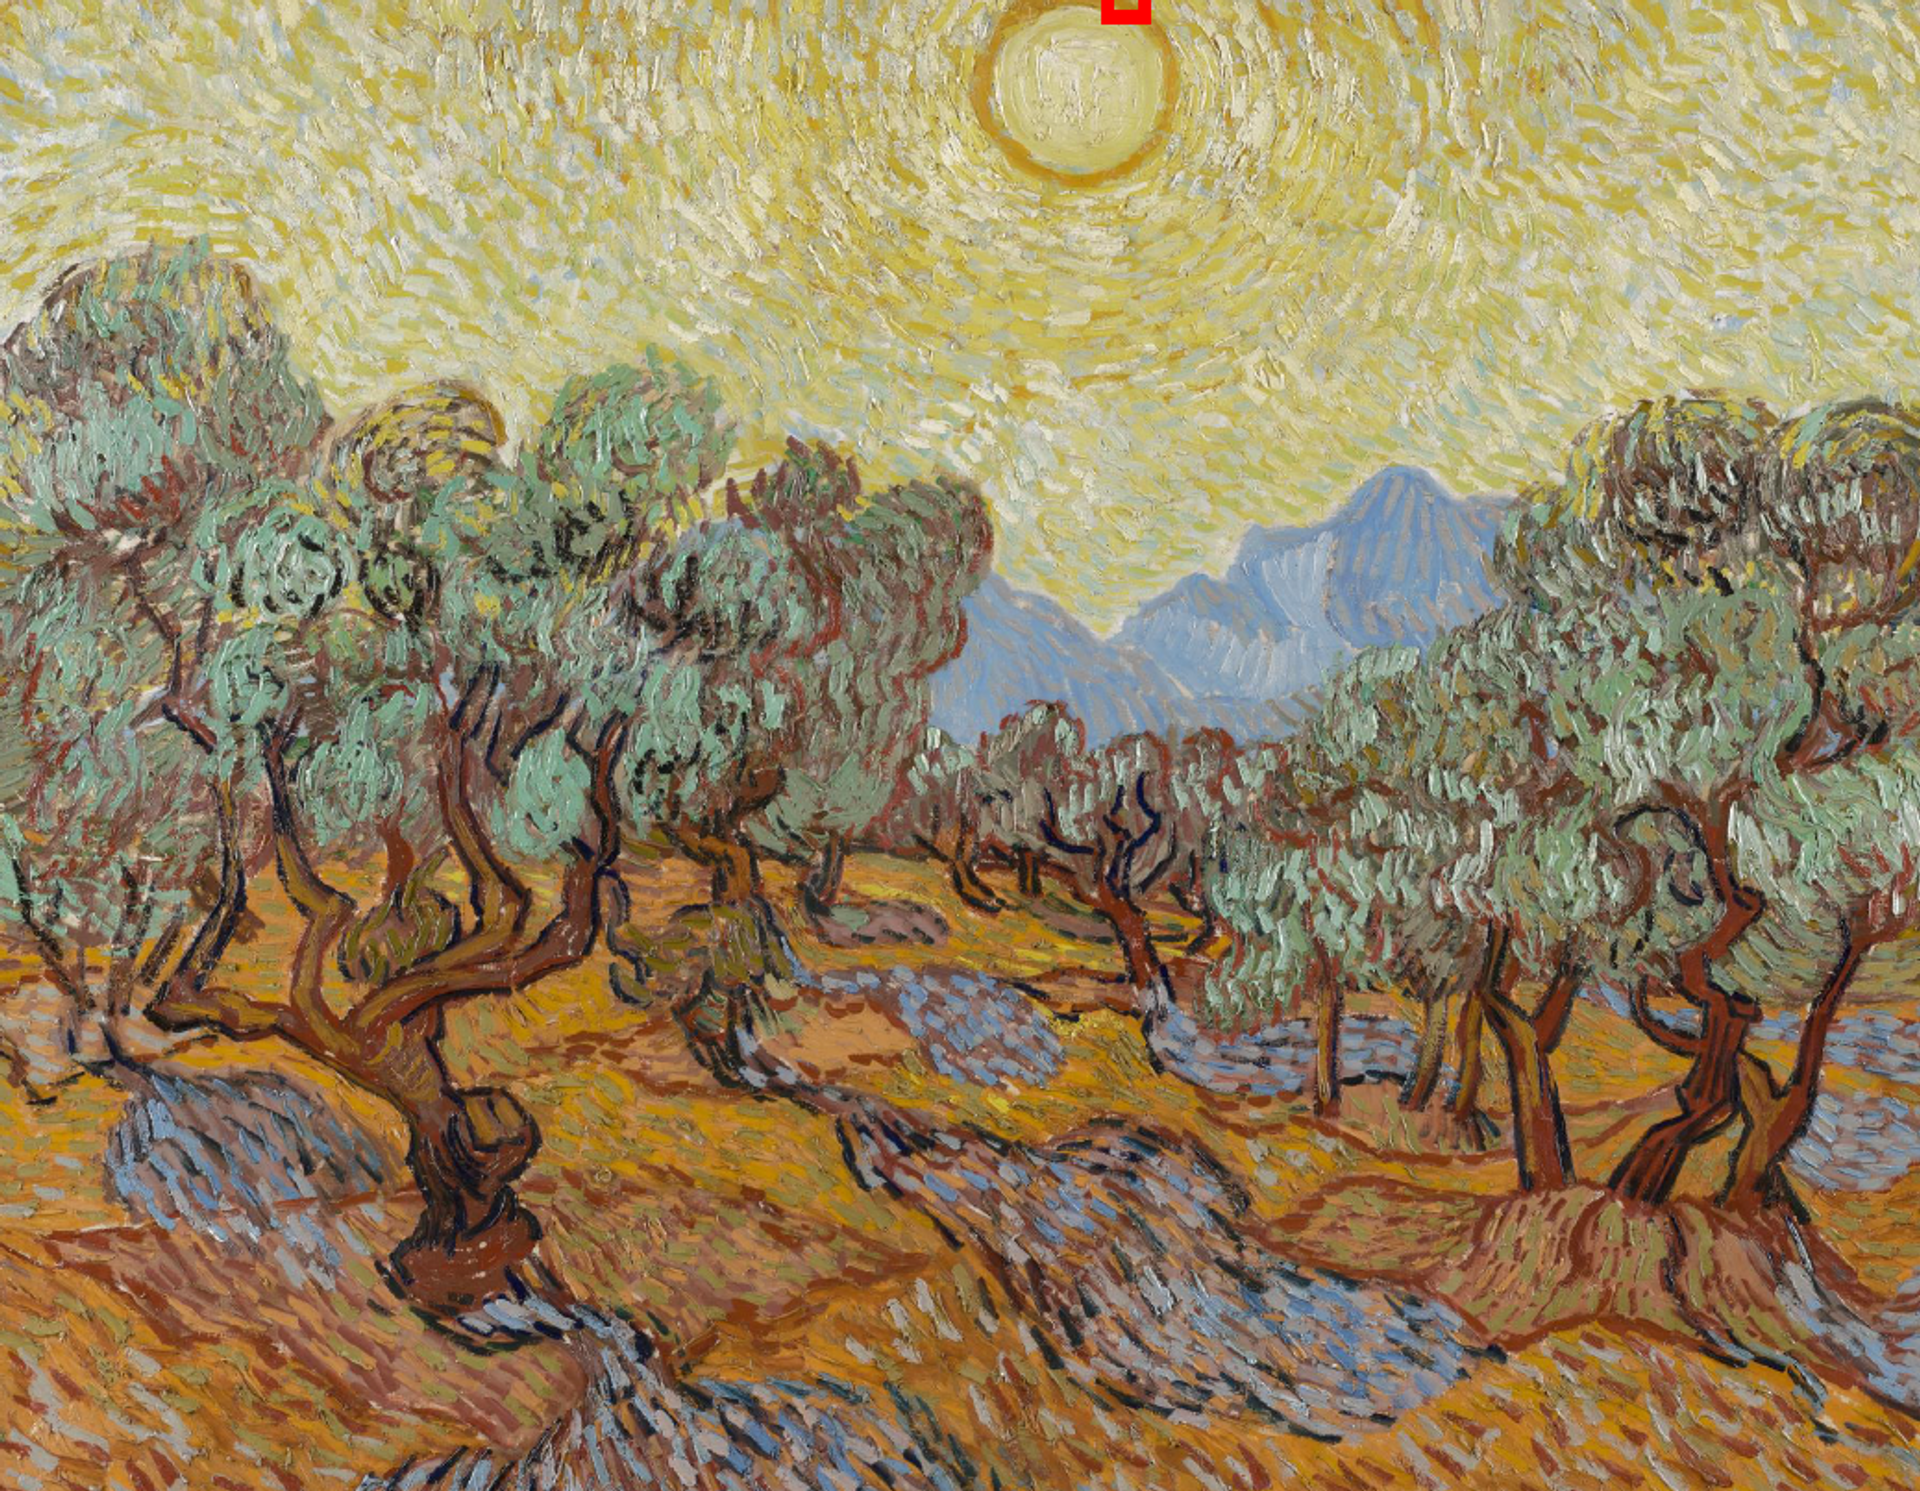 Van Gogh’s Olive Trees (November 1889), with the area of the fingerprint indicated with a red square. Courtesy of Minneapolis Institute of Art (William Hood Dunwoody Fund f710, Jh1856)